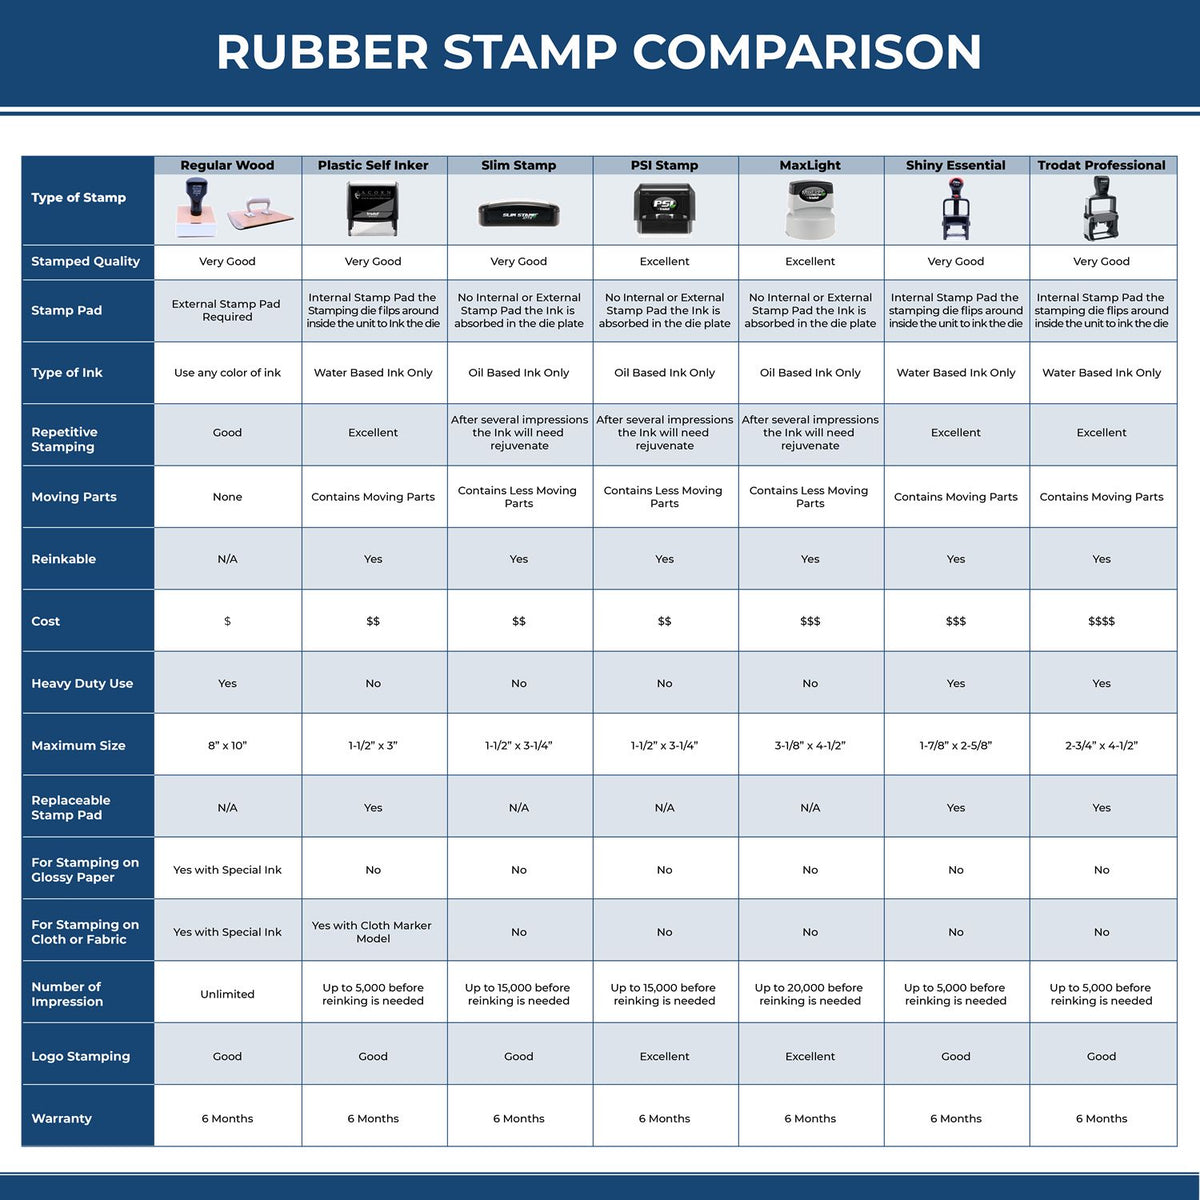 A comparison chart for the different types of mount models available for the PSI Wisconsin Notary Stamp.